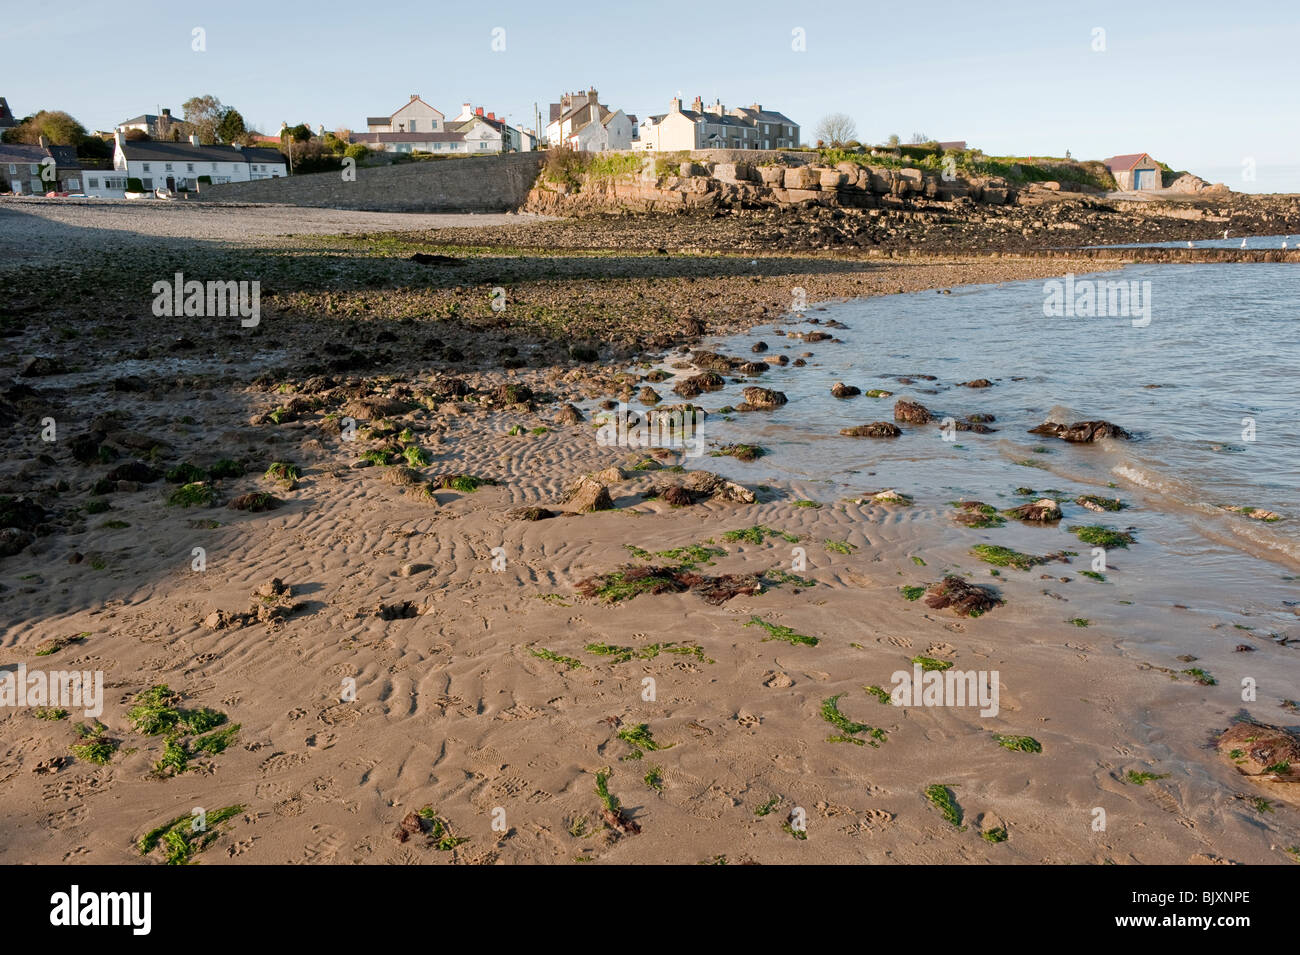 Moelfre Bay beach Anglesey North Wales UK Foto Stock